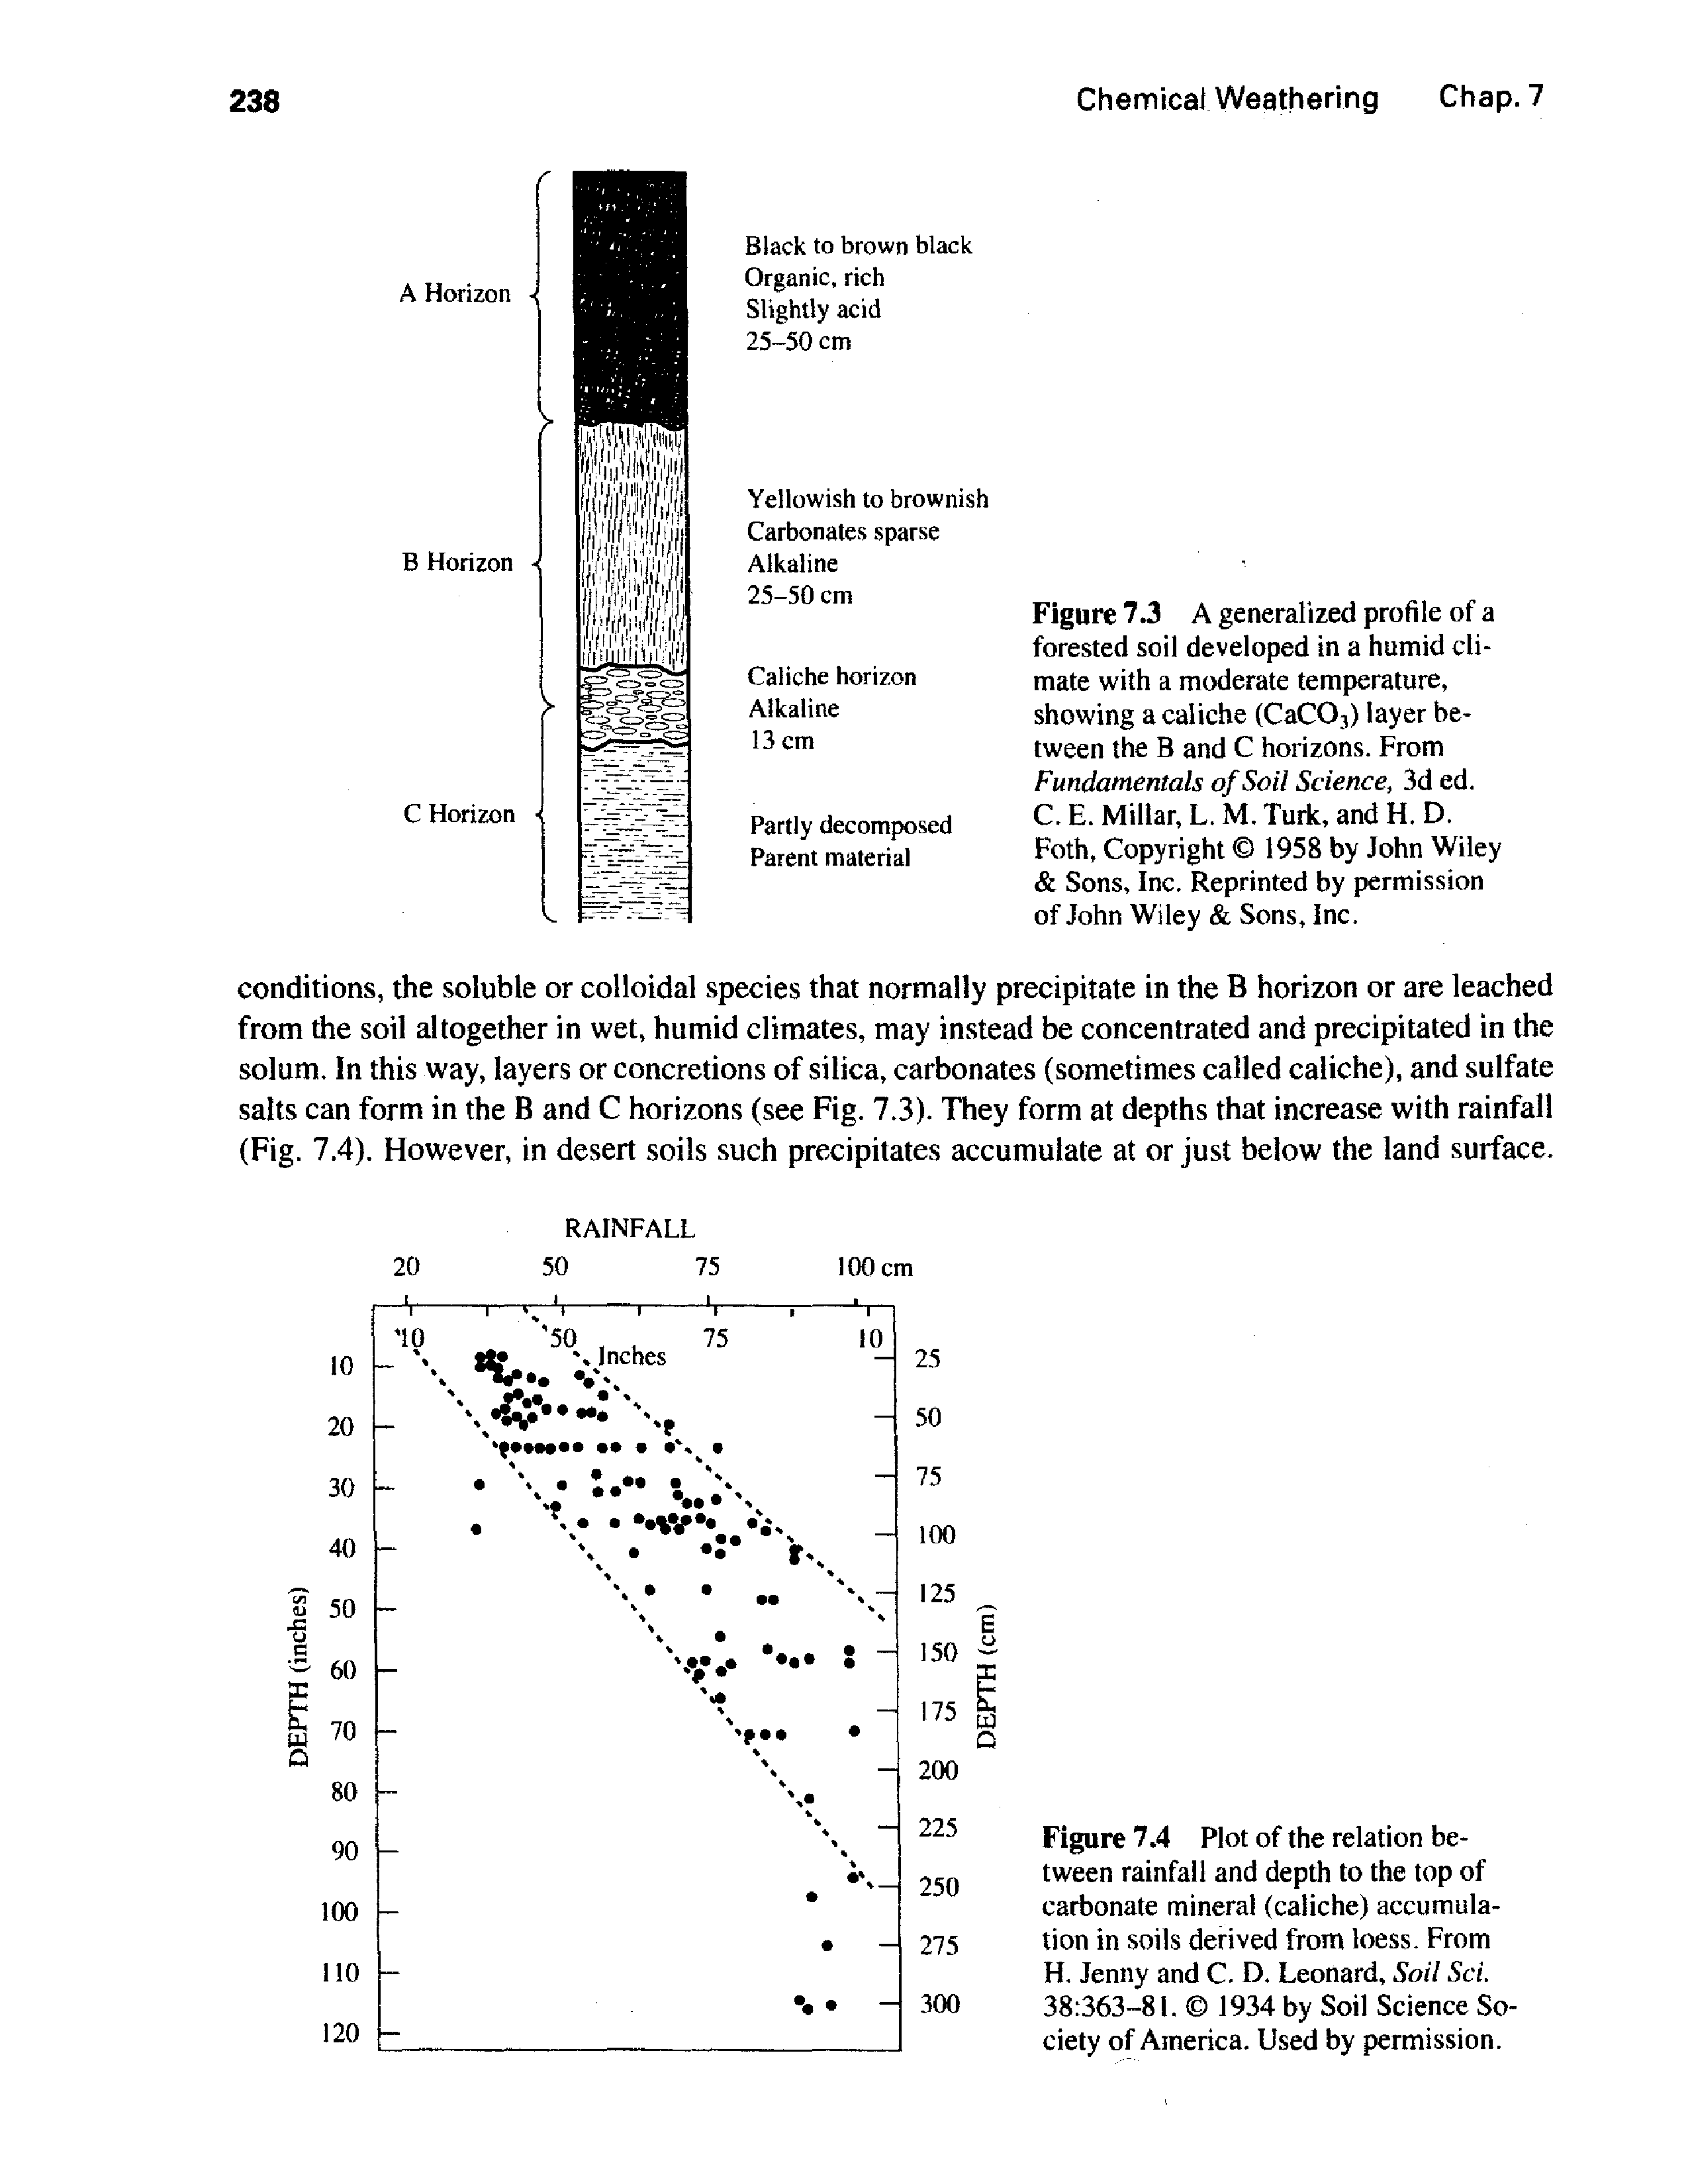 Figure 7.3 A generalized profile of a forested soil developed in a humid climate with a moderate temperature, showing a caliche (CaCOj) layer between the B and C horizons. From Fundamentals of Soil Science, 3d ed.